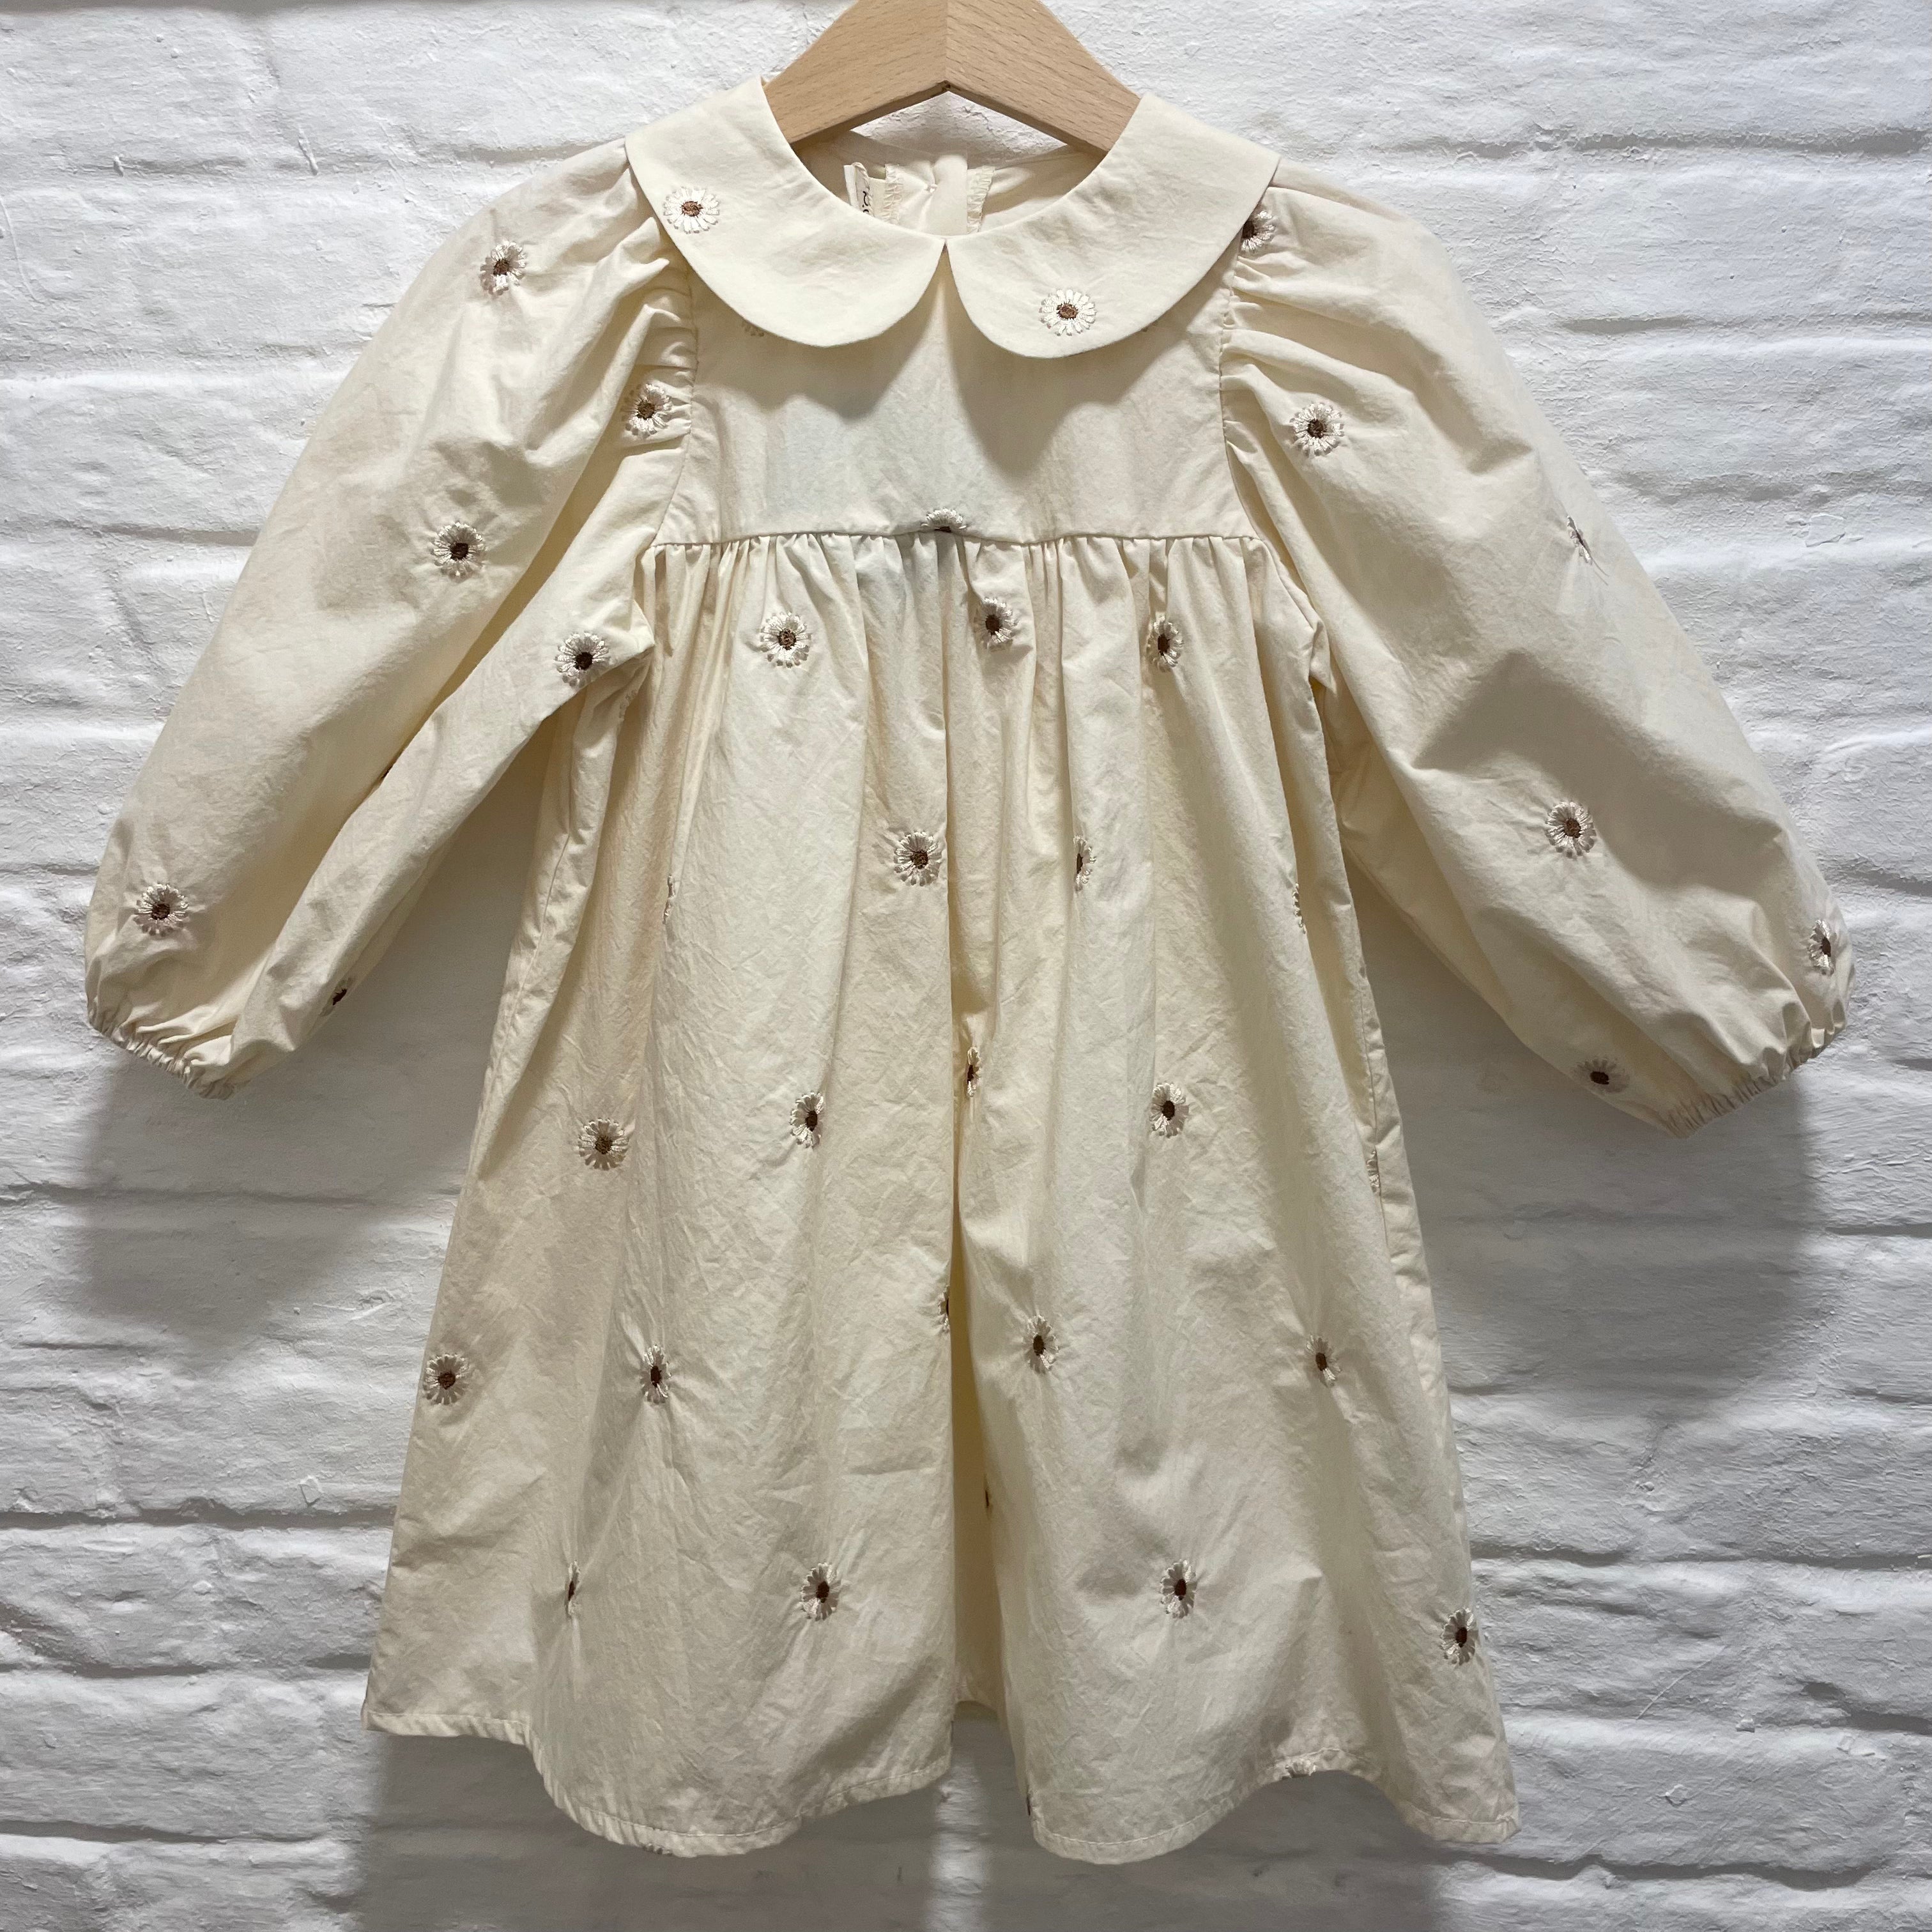 Hygge Selection - embroidery collar dress - cream